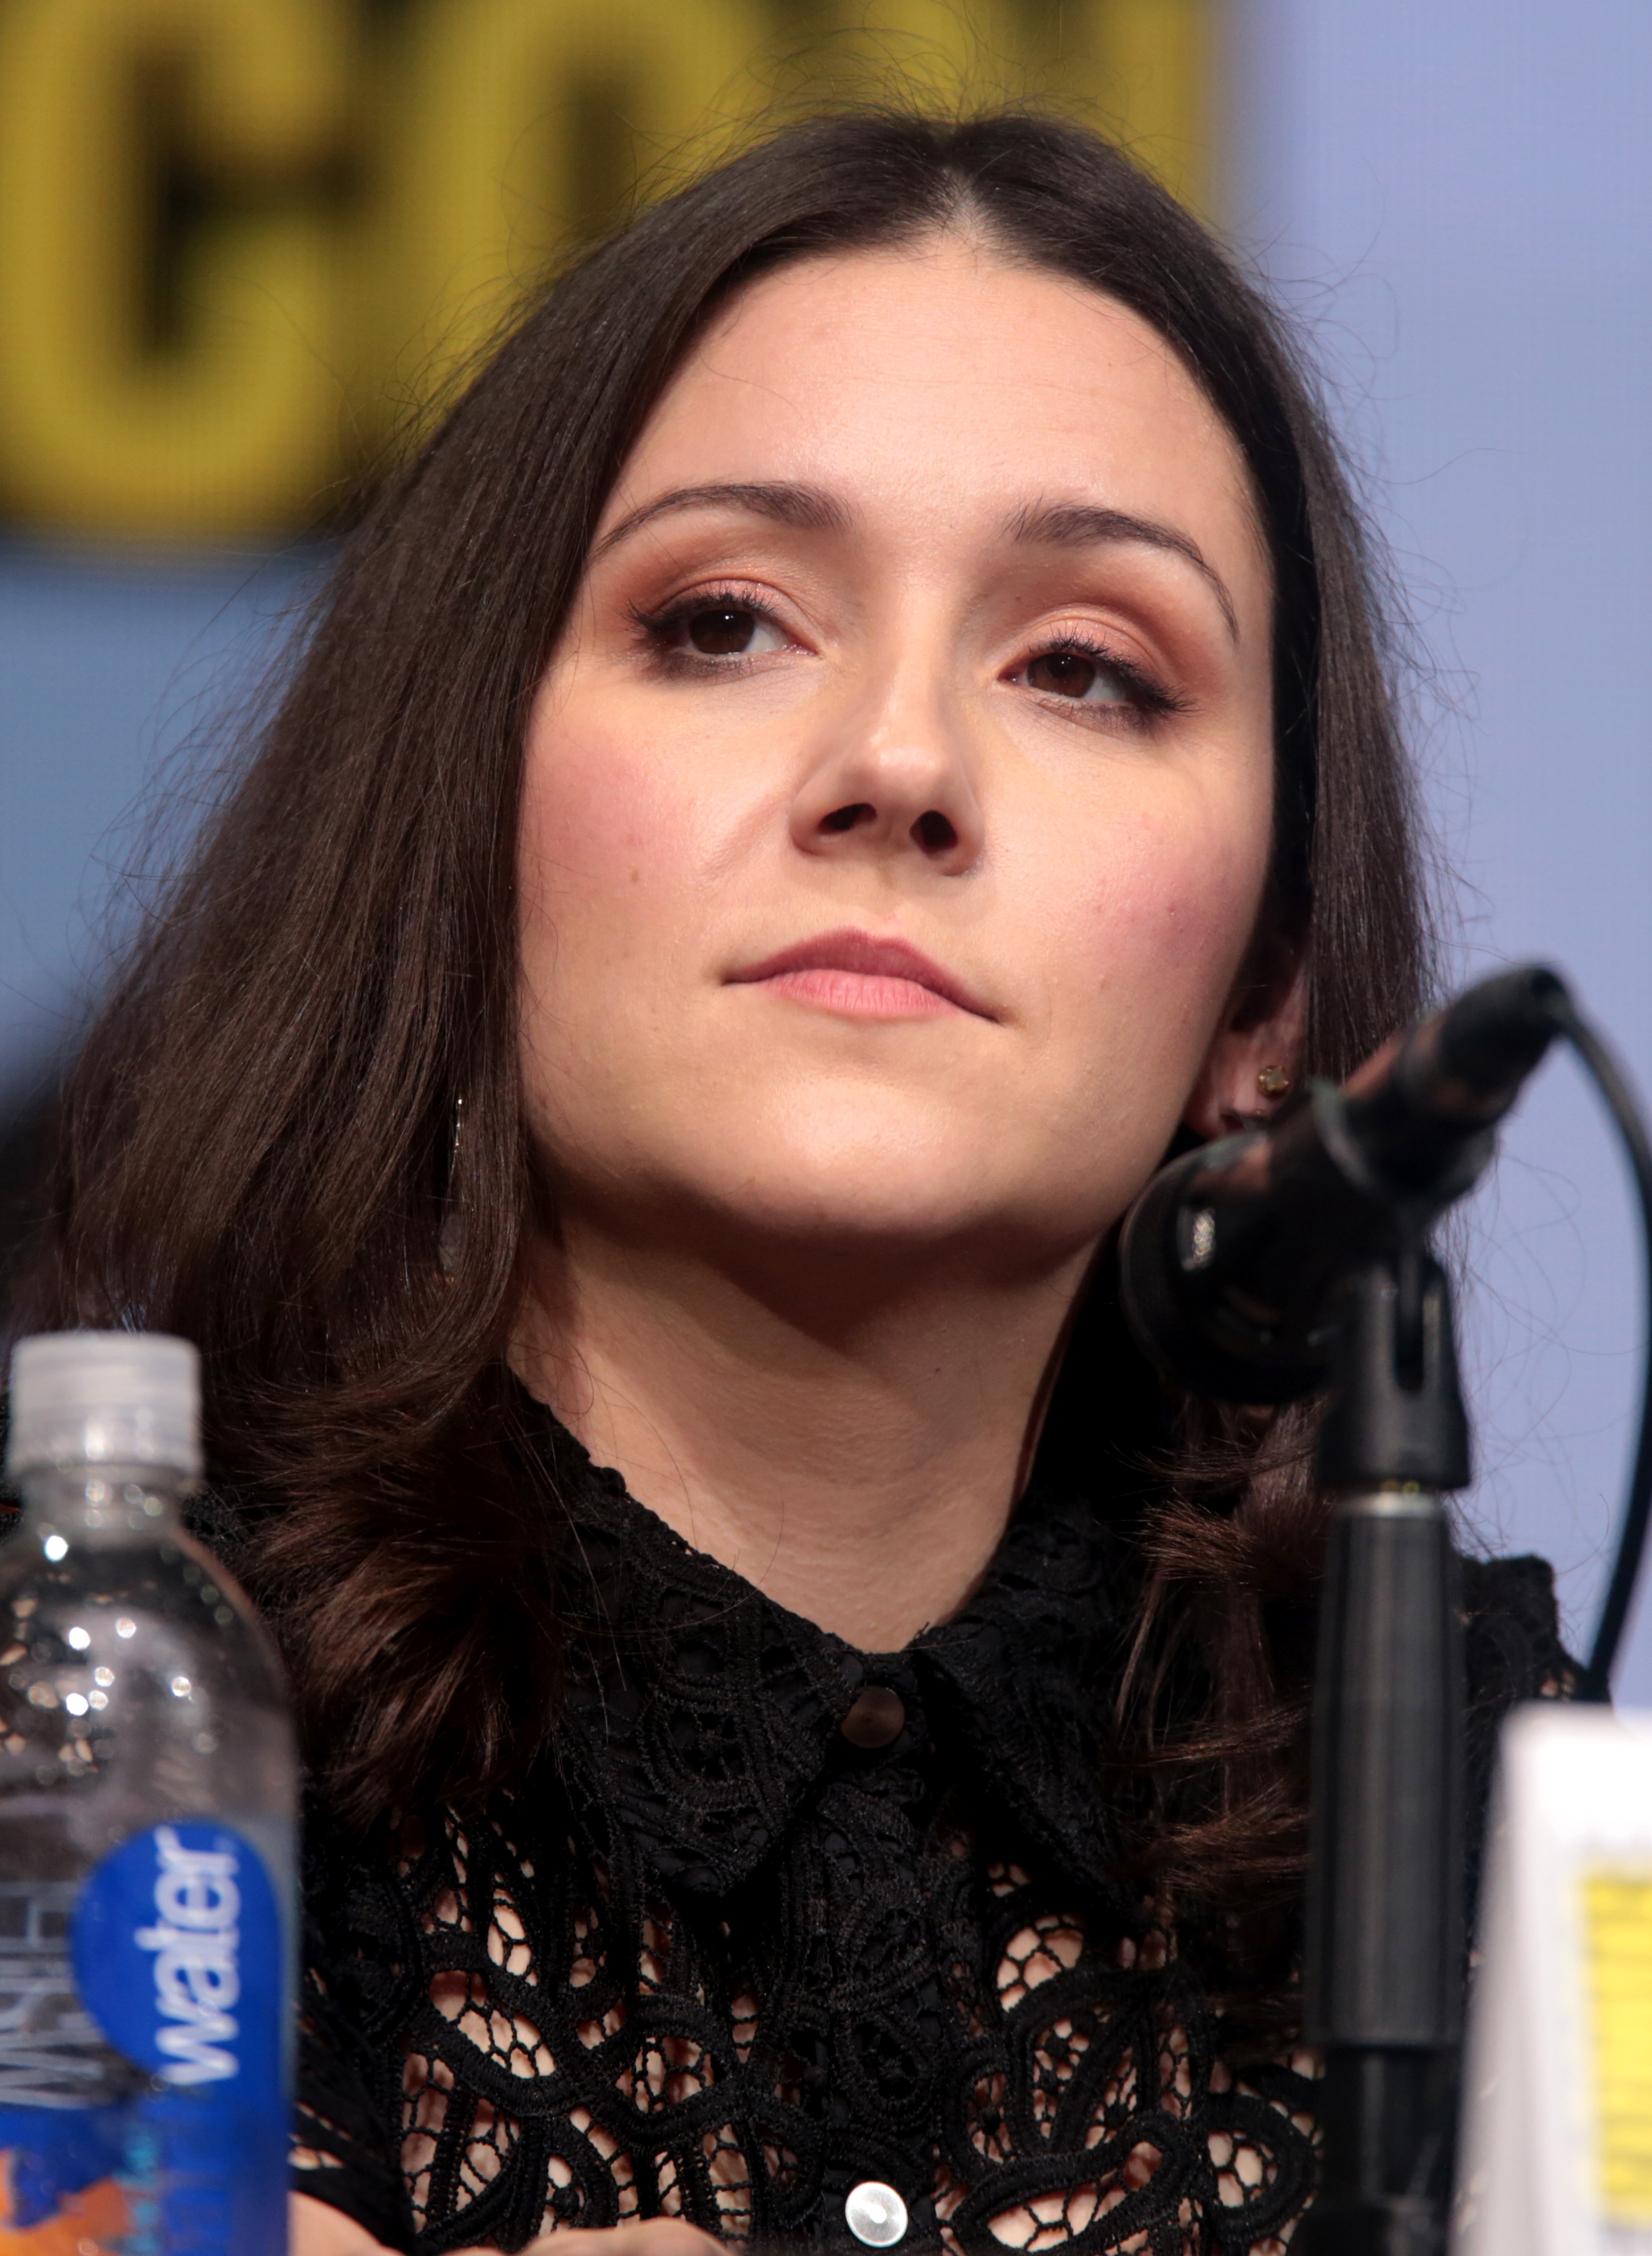 The 38-year old daughter of father (?) and mother(?) Shannon Woodward in 2023 photo. Shannon Woodward earned a  million dollar salary - leaving the net worth at 4 million in 2023